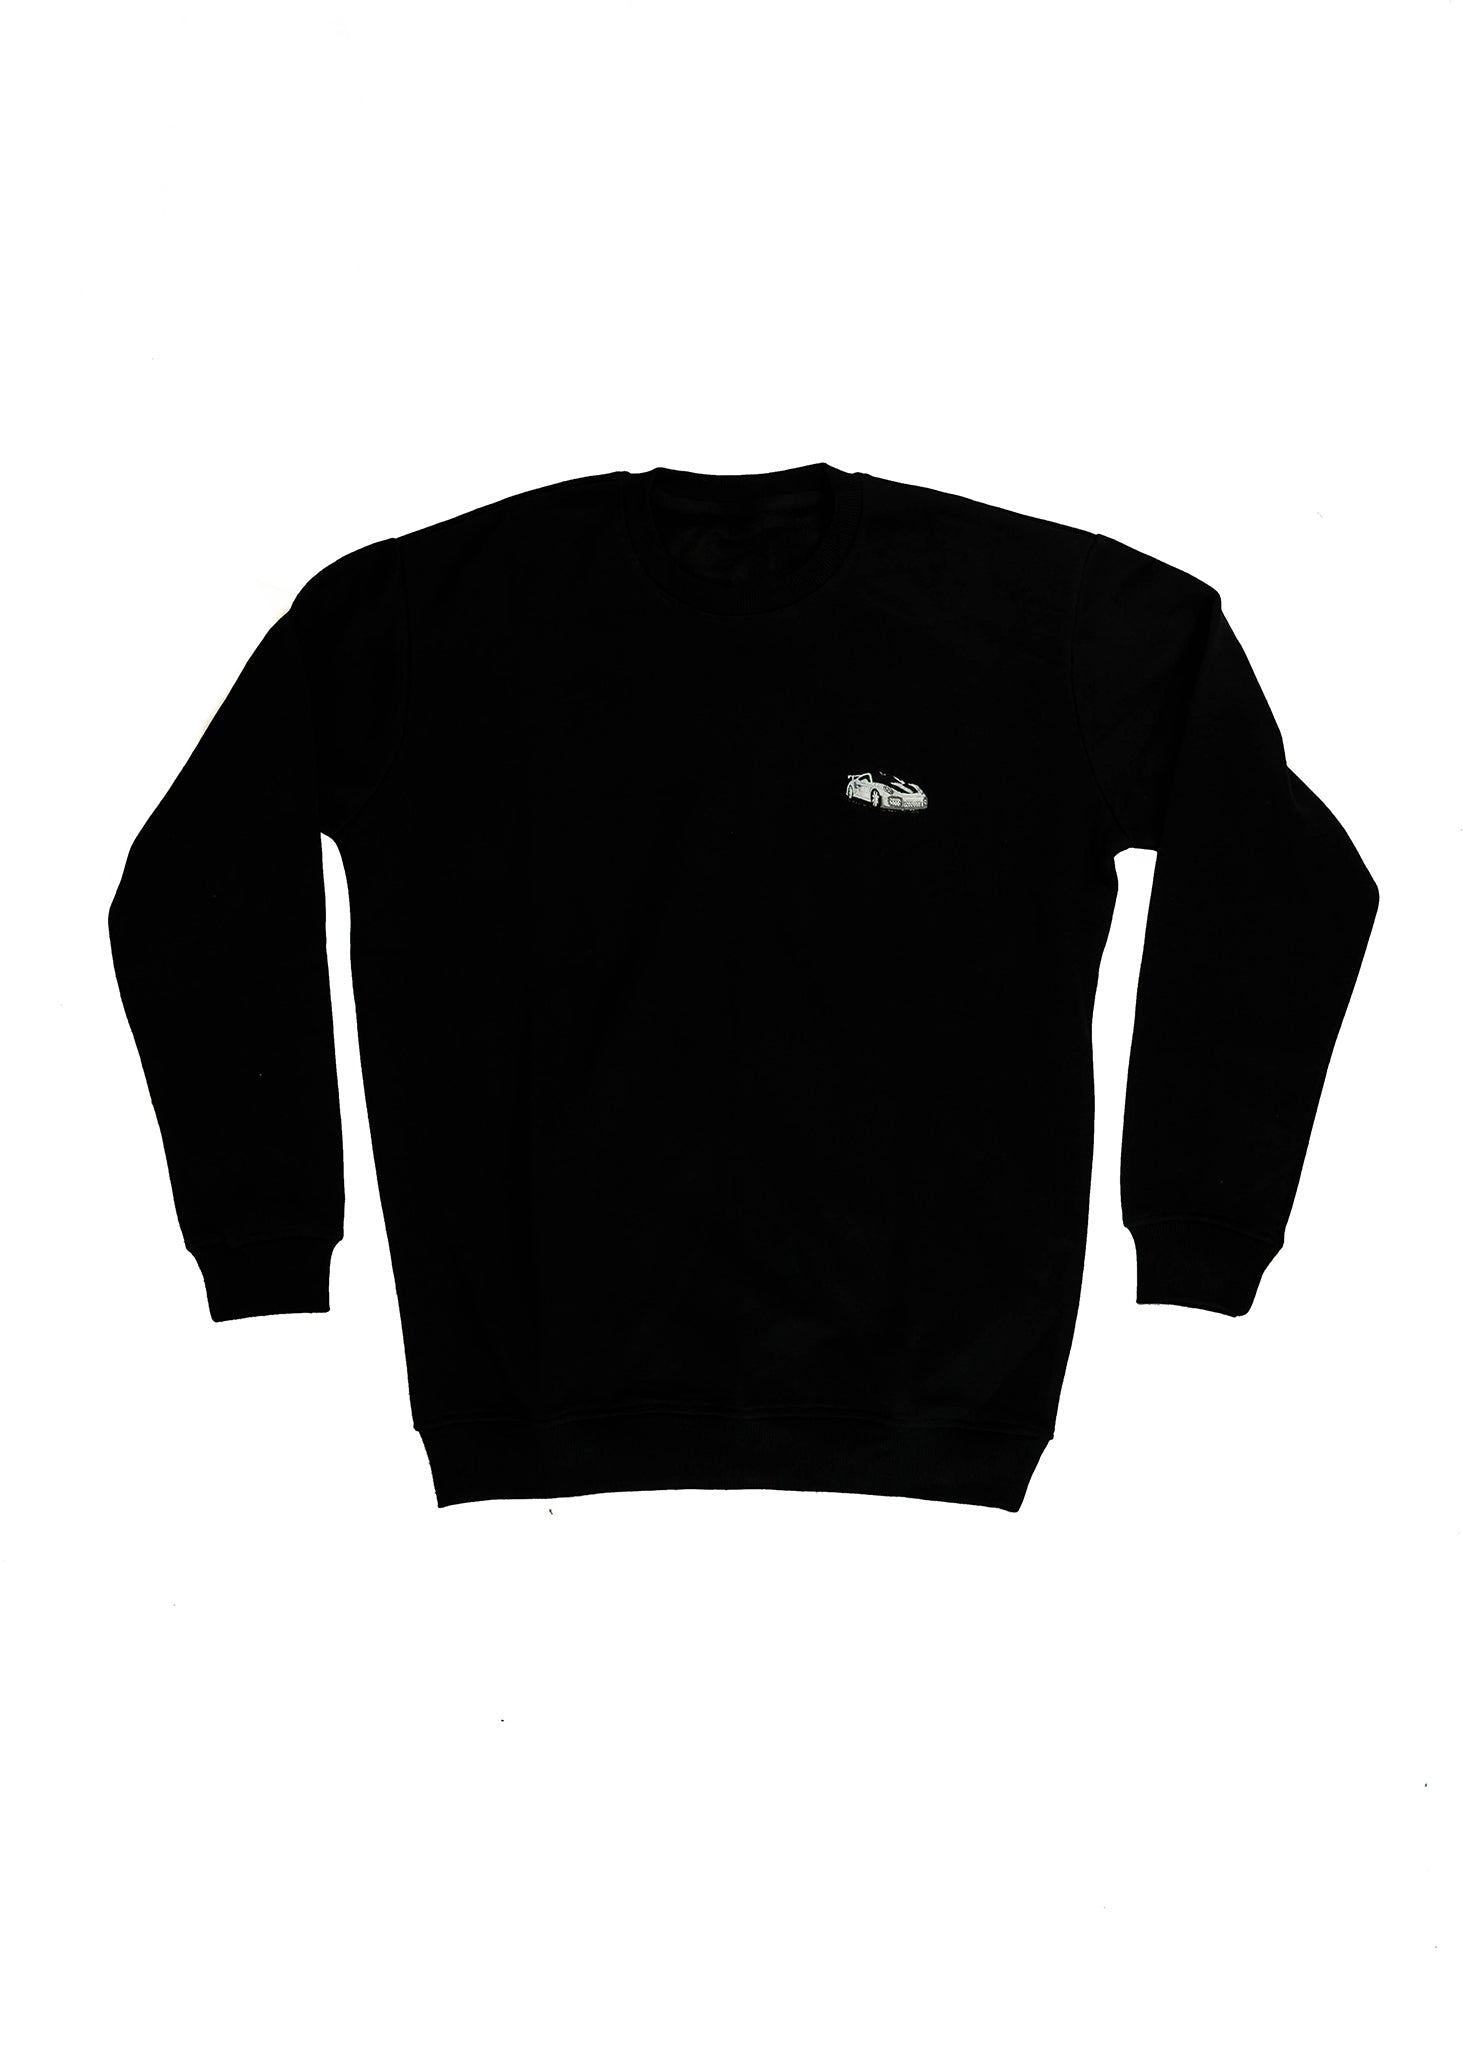 A black men's high quality crewneck sweater. Full size front view of the black sweater with a white, silver, and carbon fiber embroidered 991.2 GT2 RS. Fabric composition is a mix of cotton and polyester. The material is very soft, stretchy, and non-transparent. The style of this sweater is a crewneck, long sleeve, elastic bottom, with embroidery on the left chest.